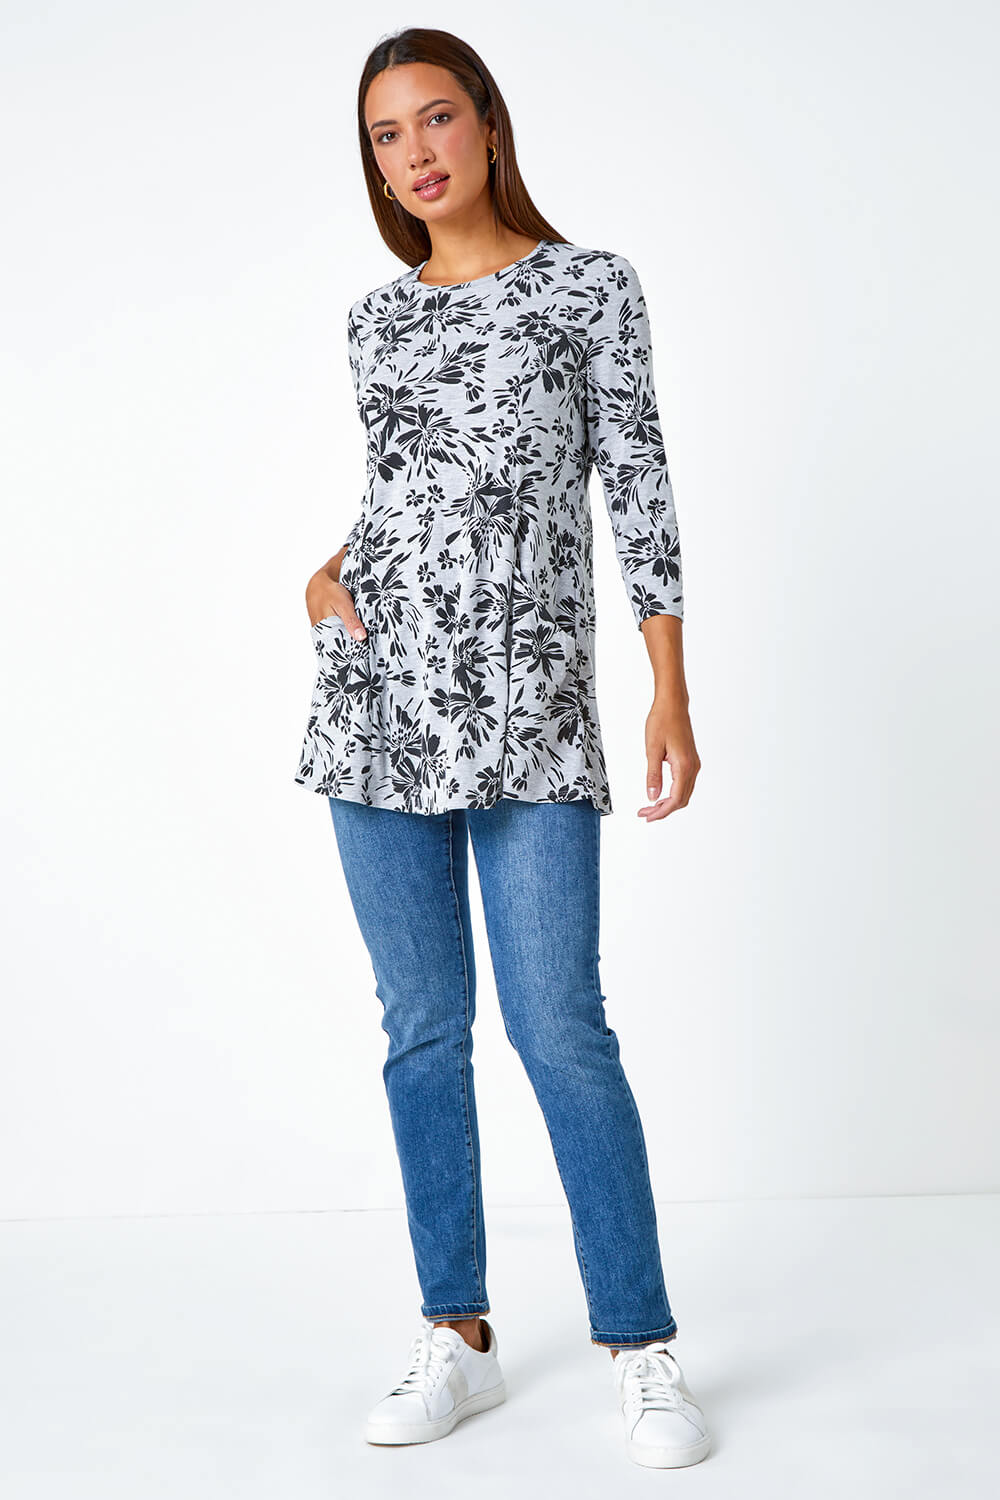 Grey Floral Pocket Front Swing Stretch Top, Image 3 of 5